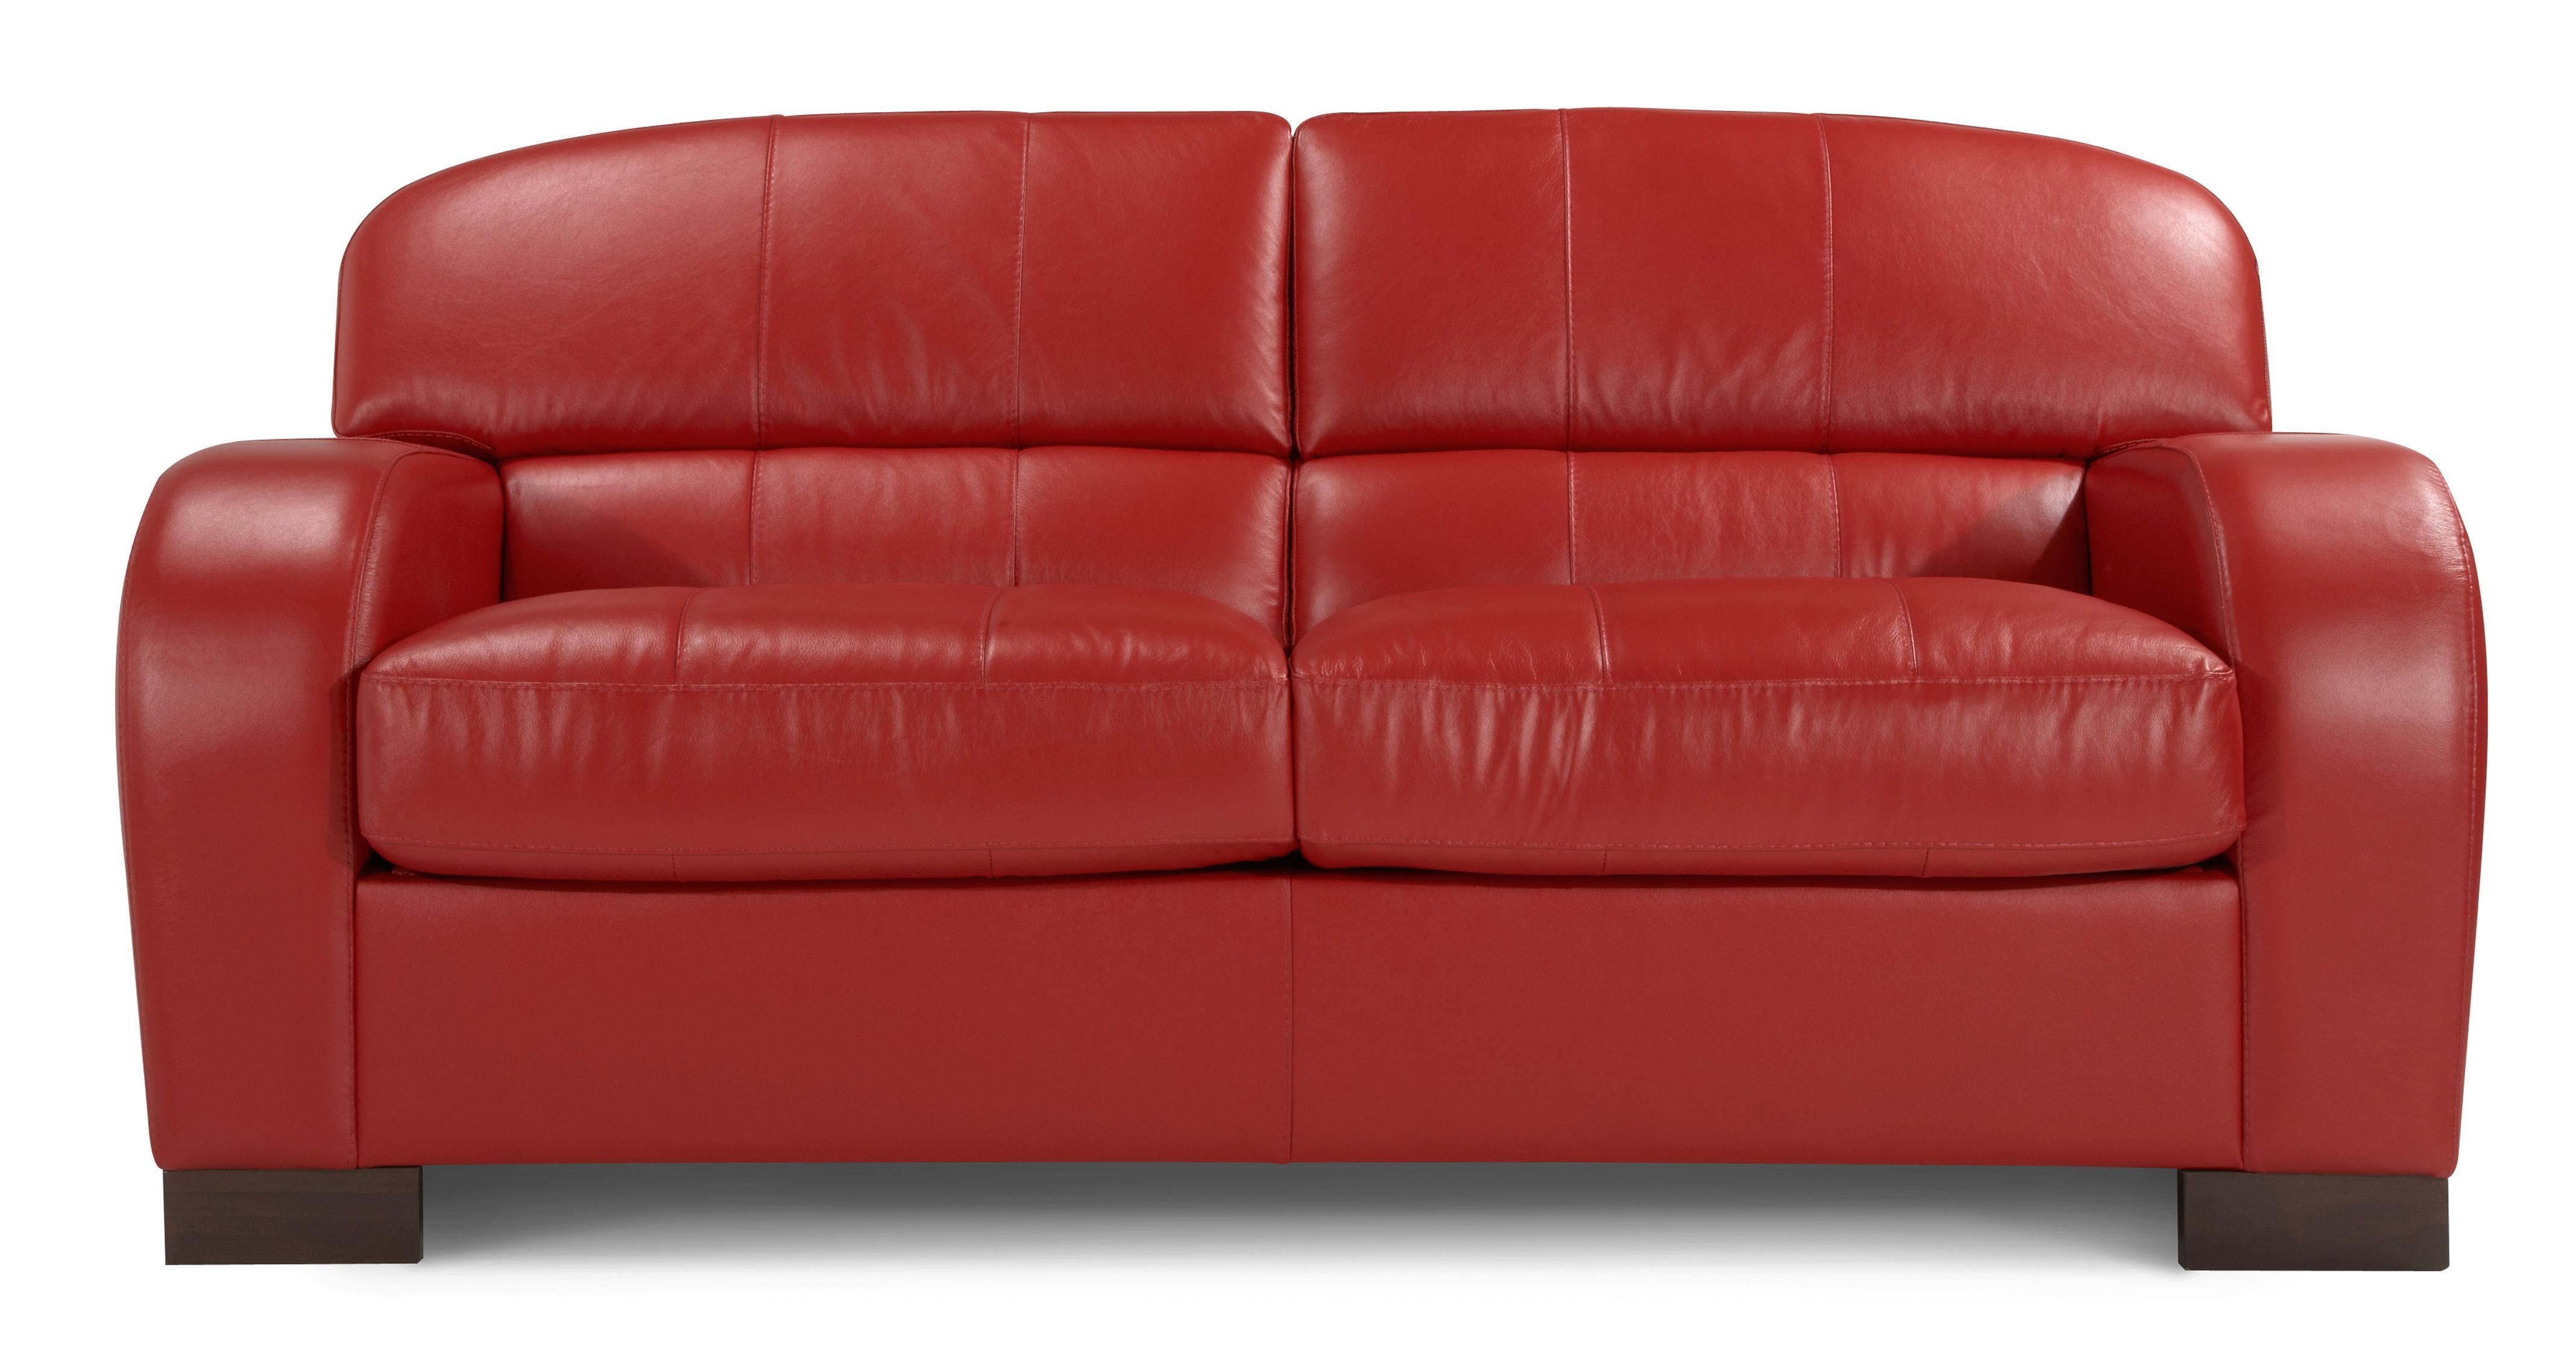 dfs sofa beds leather